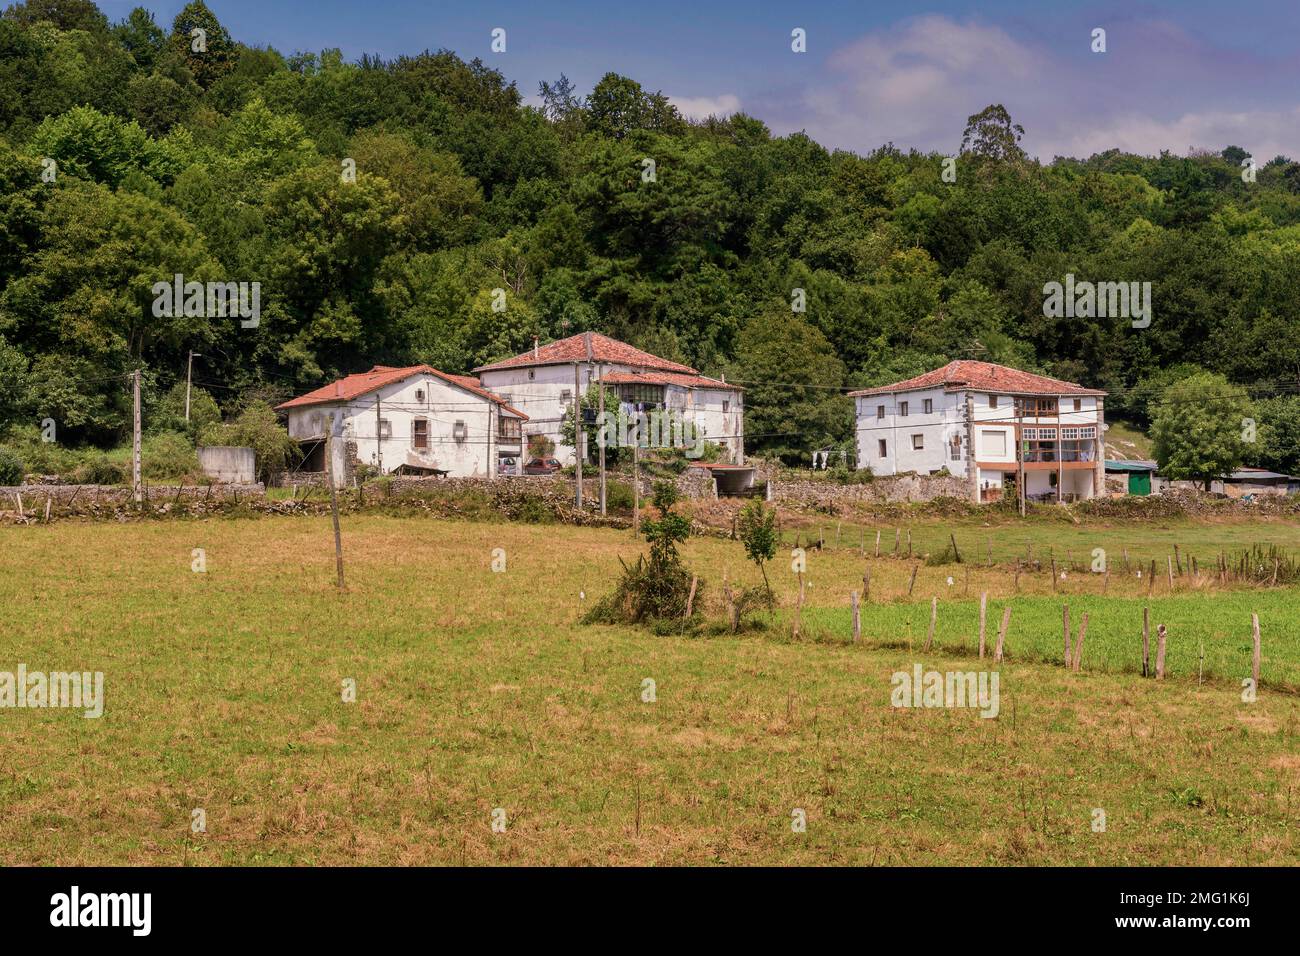 three single large individual country houses with their orchard and a forest of trees in the background typical of Cantabria in the north of Spain Stock Photo